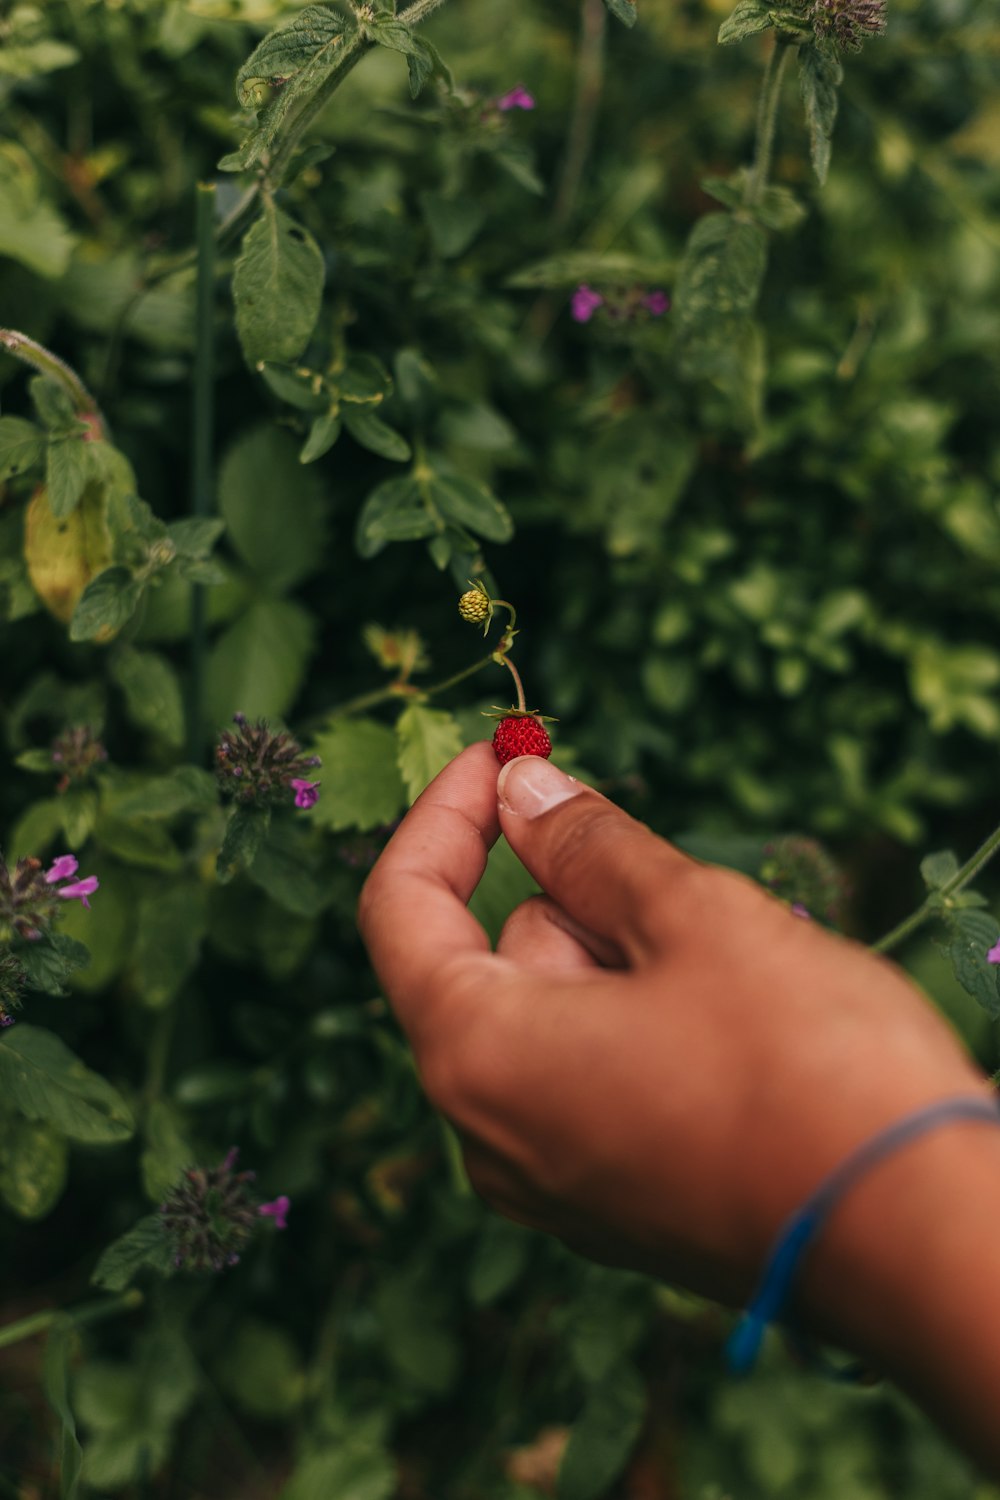 a person holding a small red berry in their hand